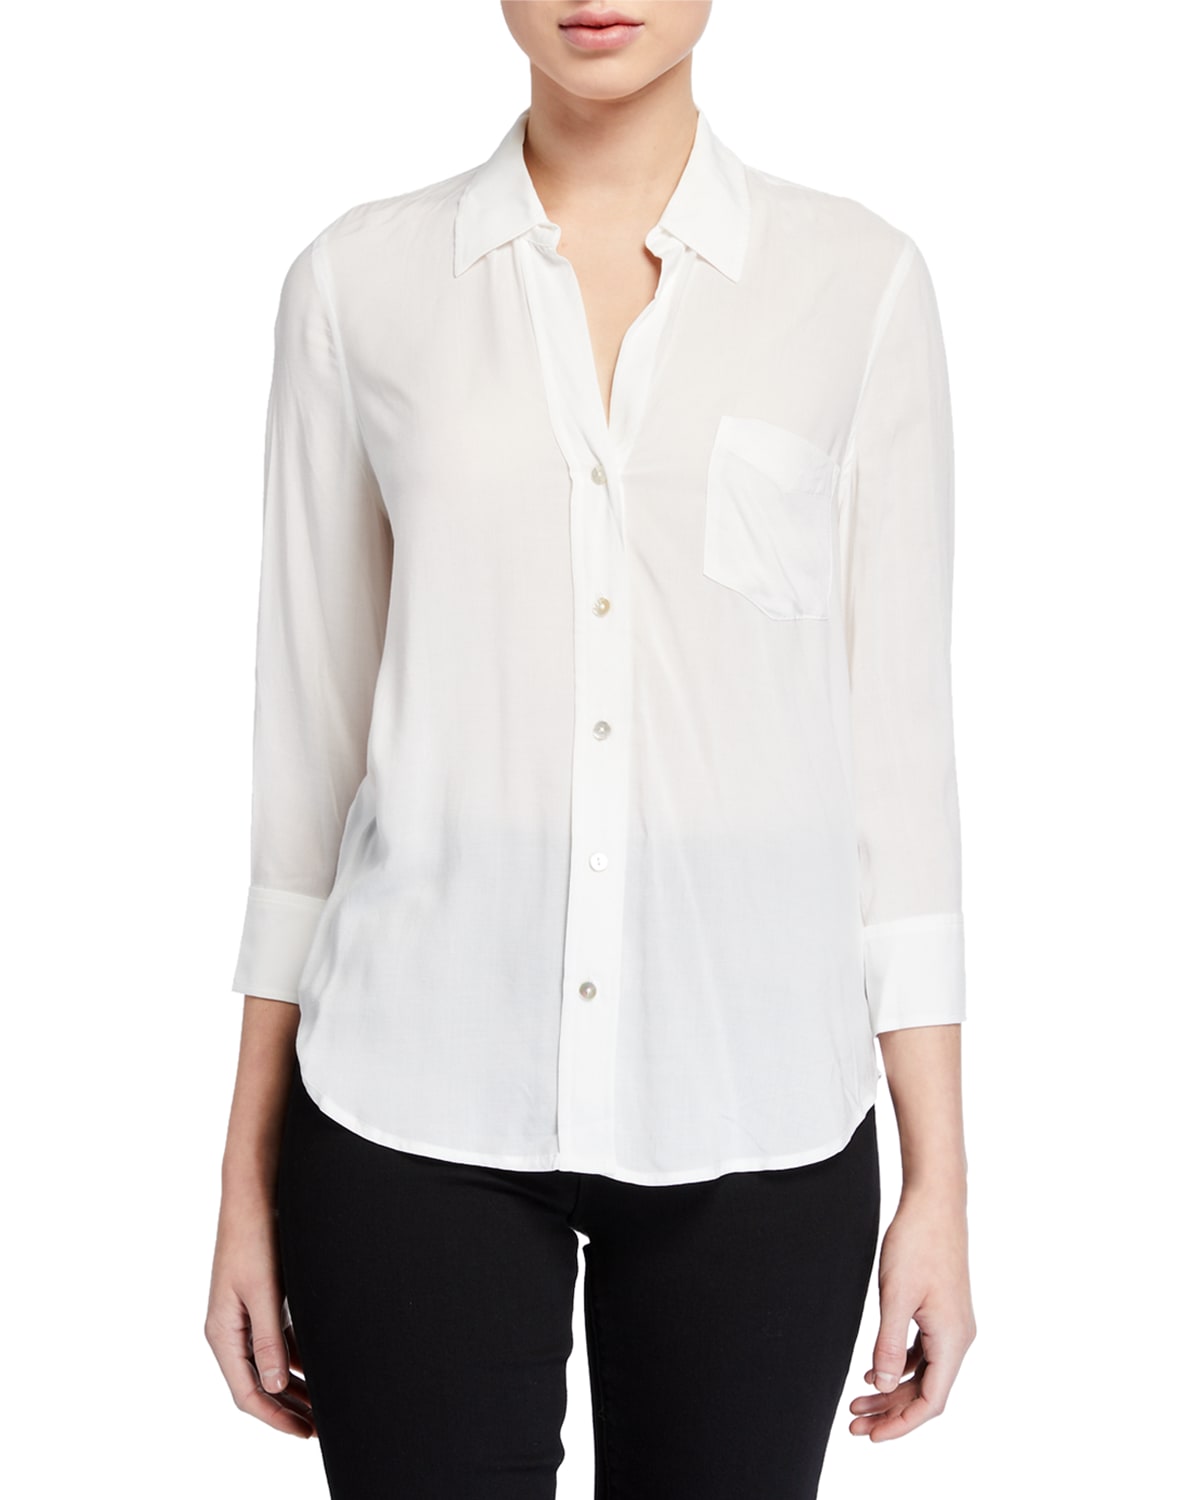 L'Agence Ryan 3/4-Sleeve Button-Down Blouse